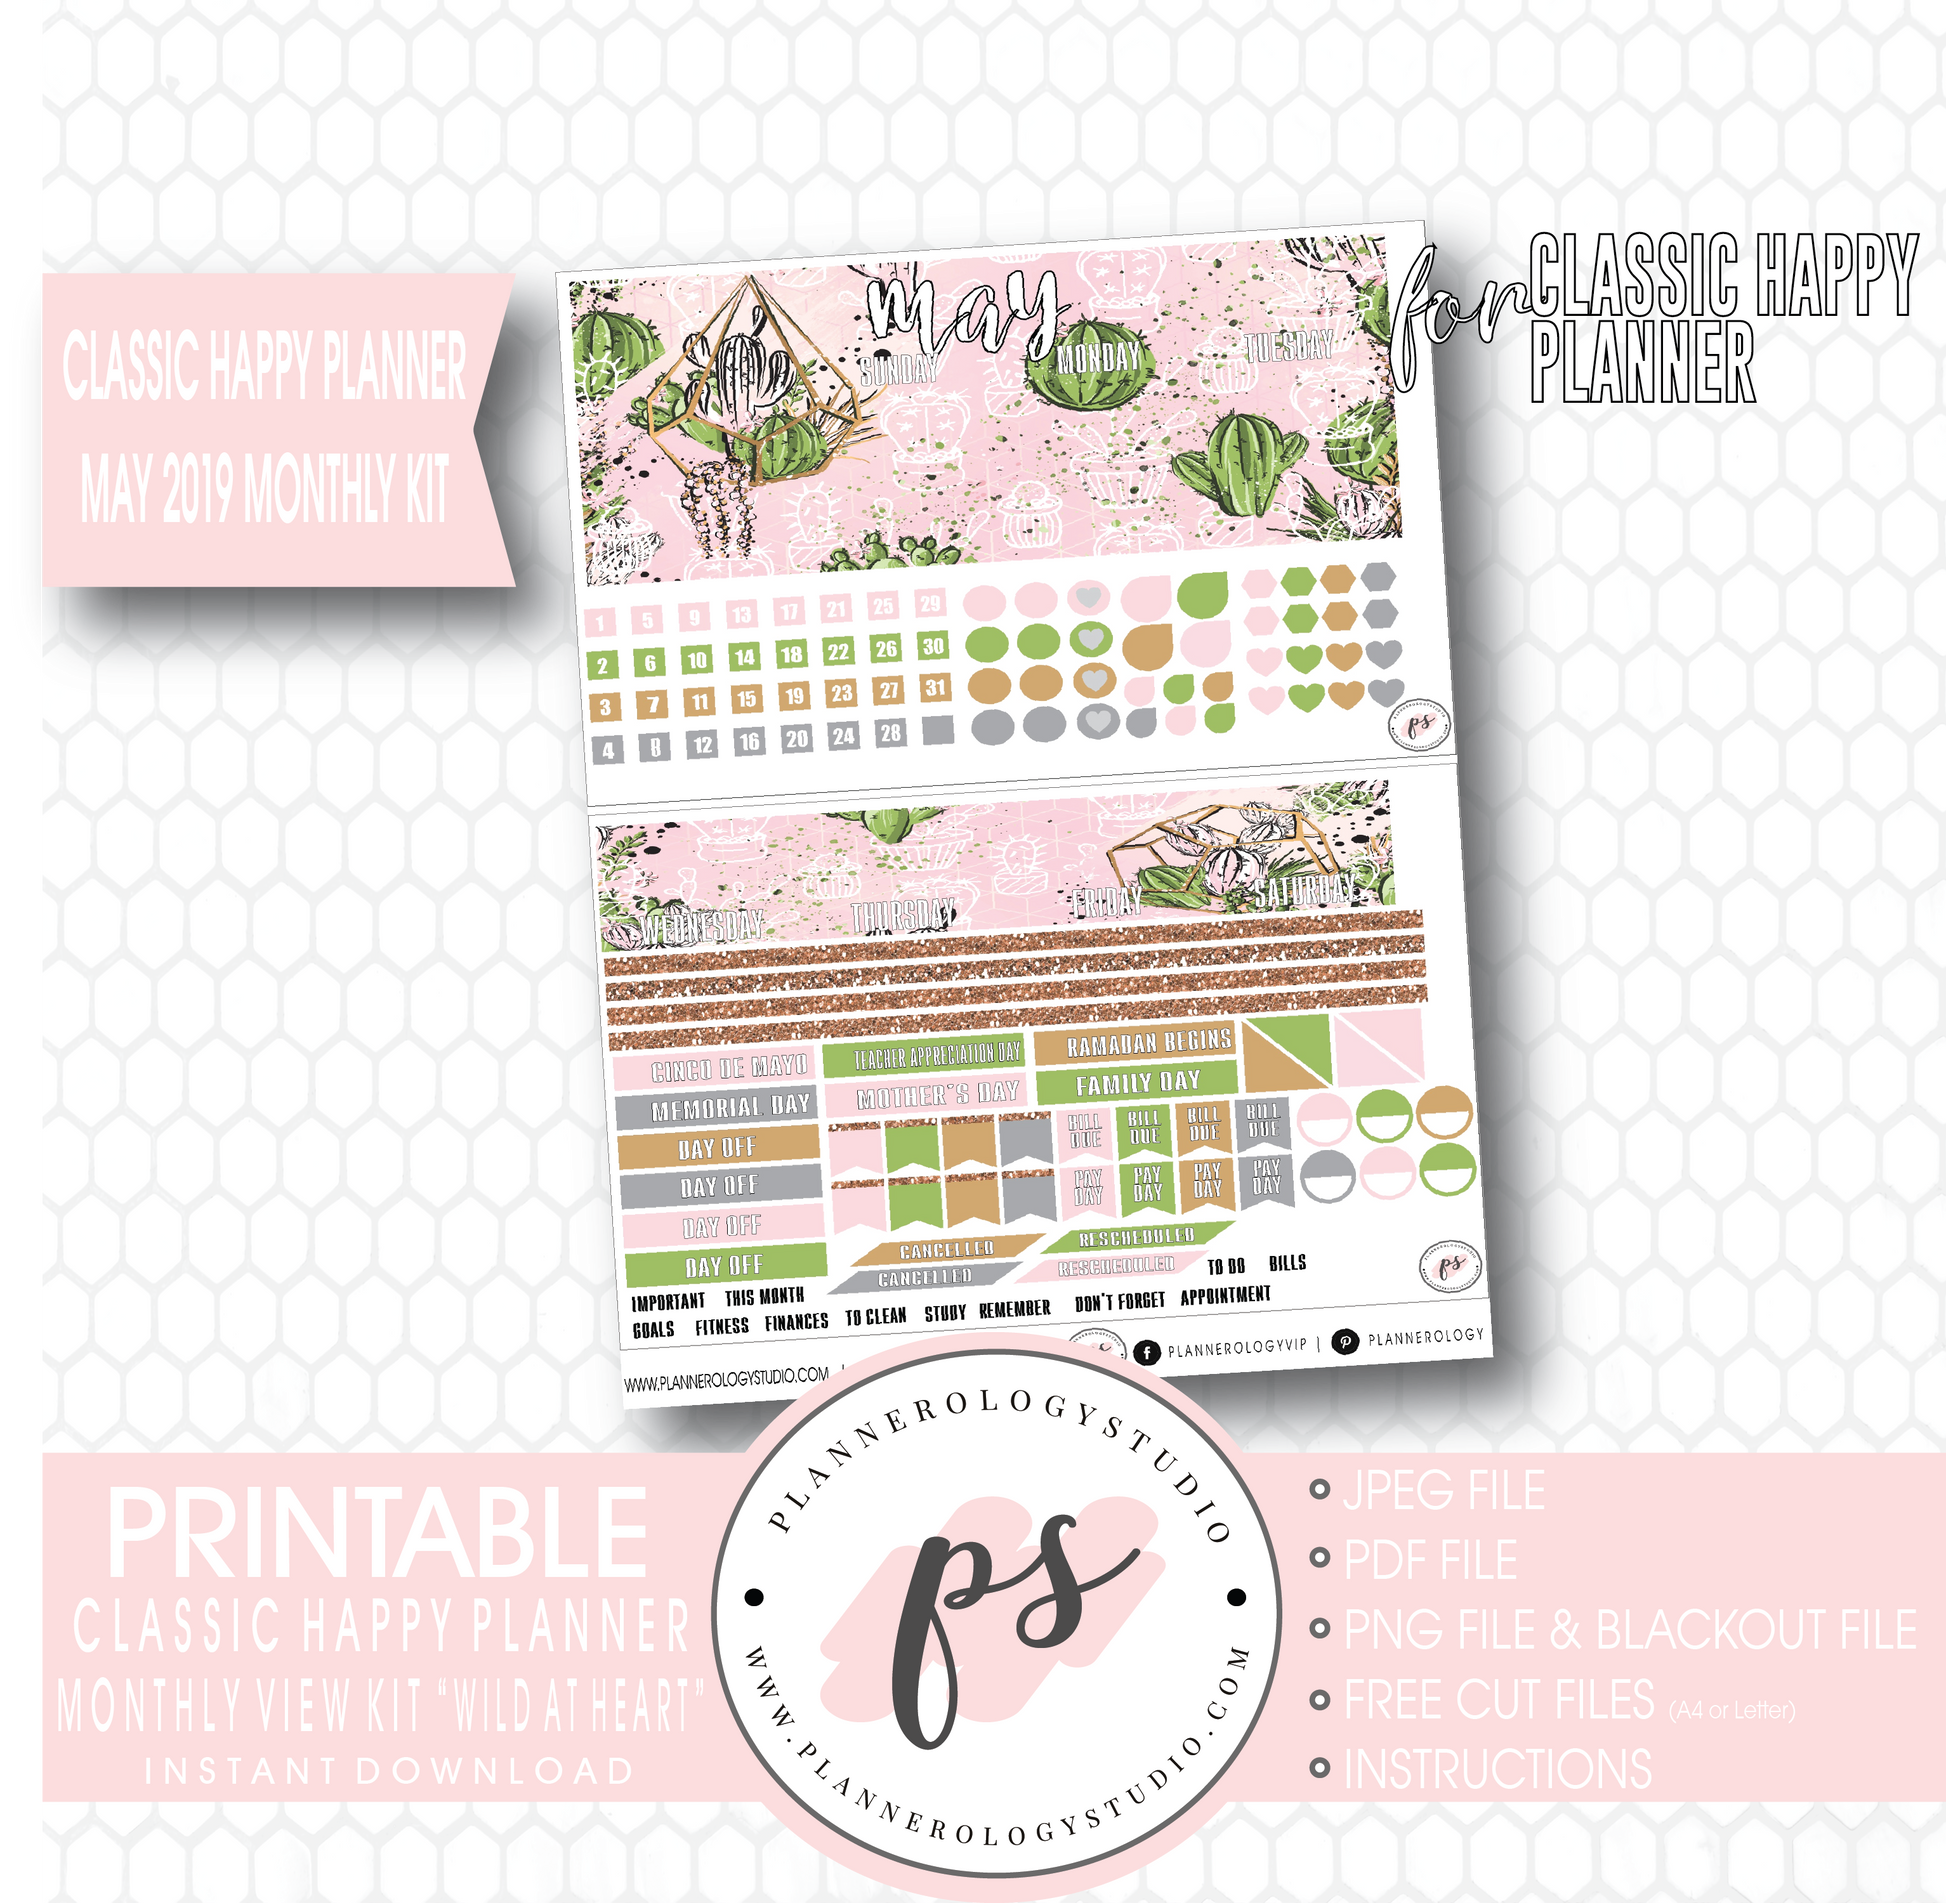 Wild At Heart May 2019 Monthly View Kit Digital Printable Planner Stickers (for use with Classic Happy Planner) - Plannerologystudio